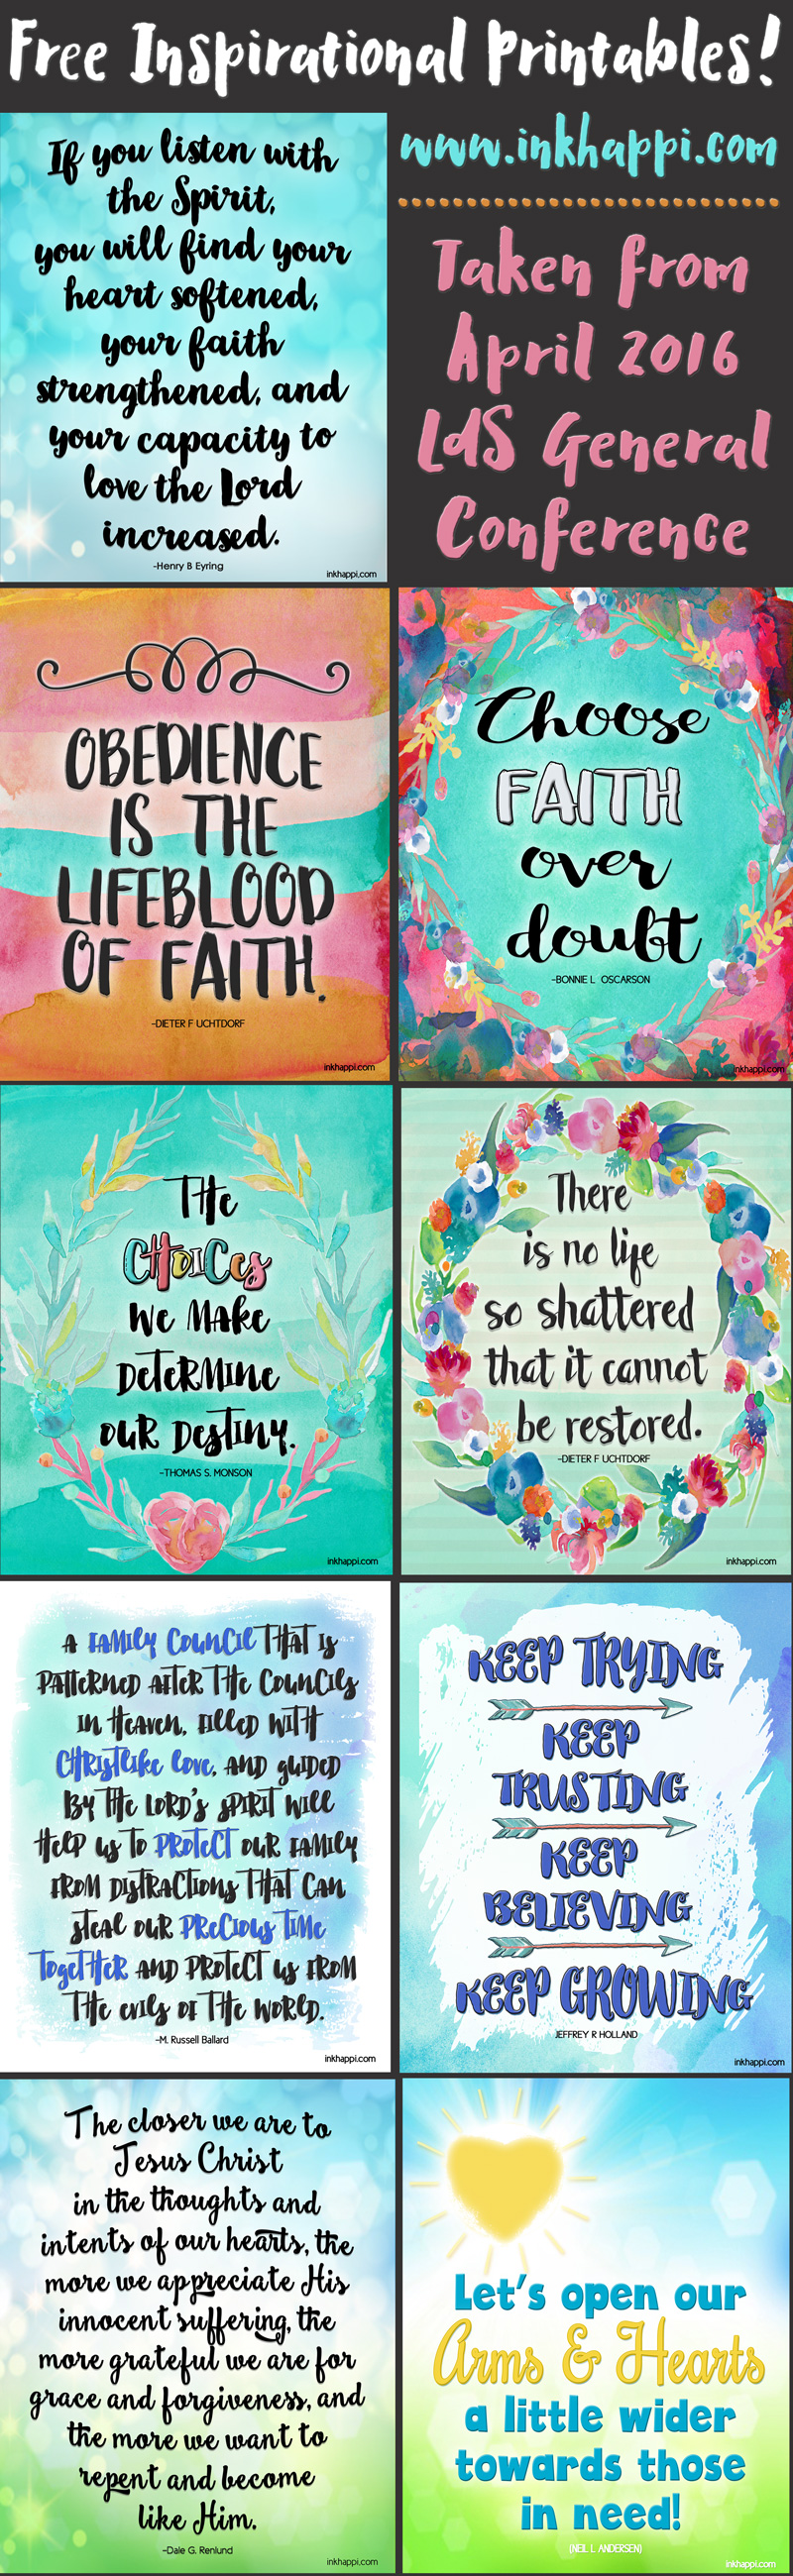 inspirational-printables-from-lds-general-conference-inkhappi